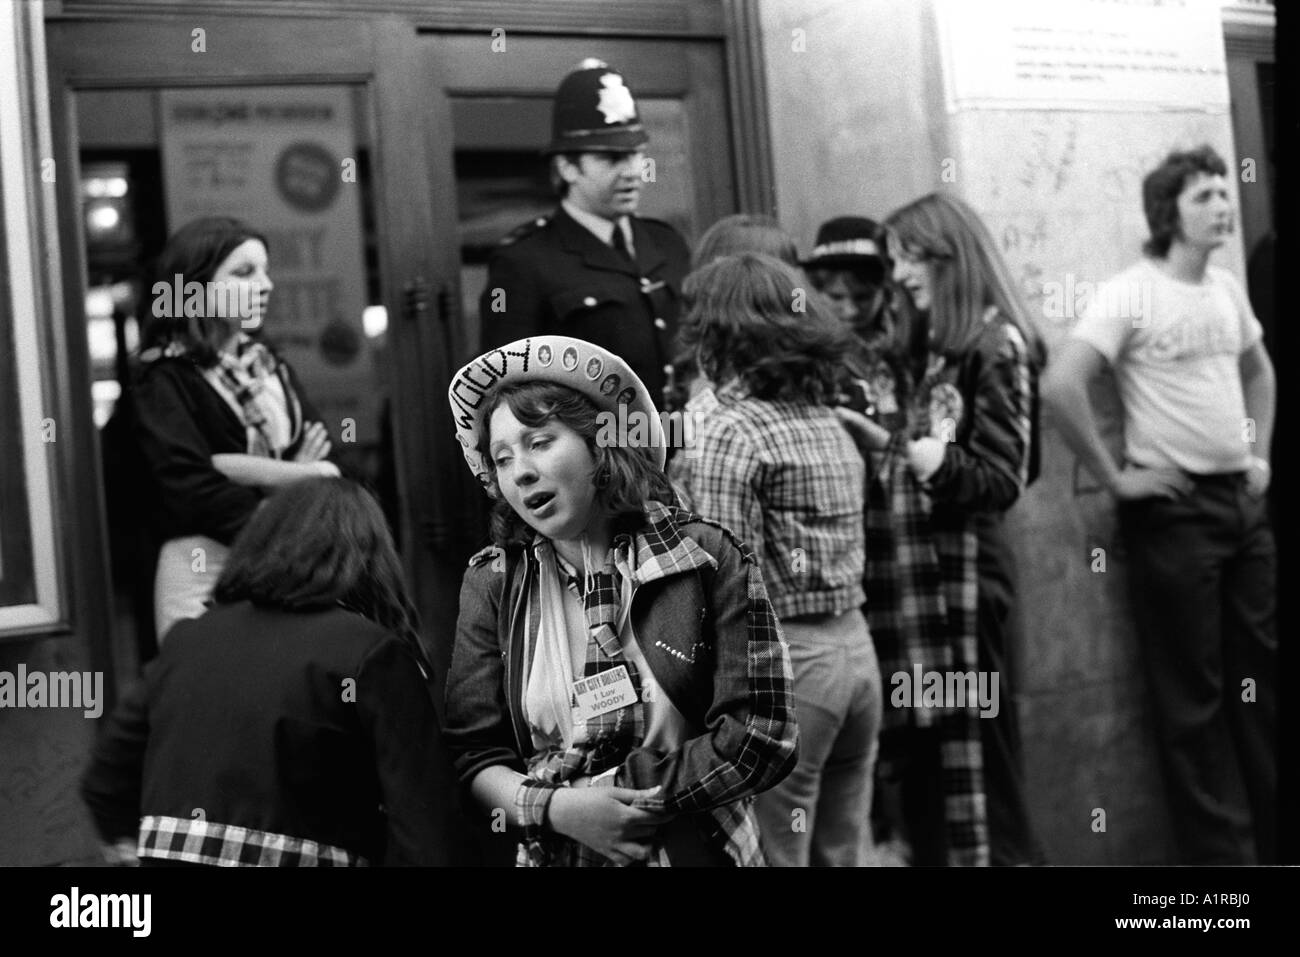 Pop Group Bay City Roller Fans attend a concert at Hammersmith Odeon west London. Crying after the end of the performance. 1970s 1975. HOMER SYKES Stock Photo